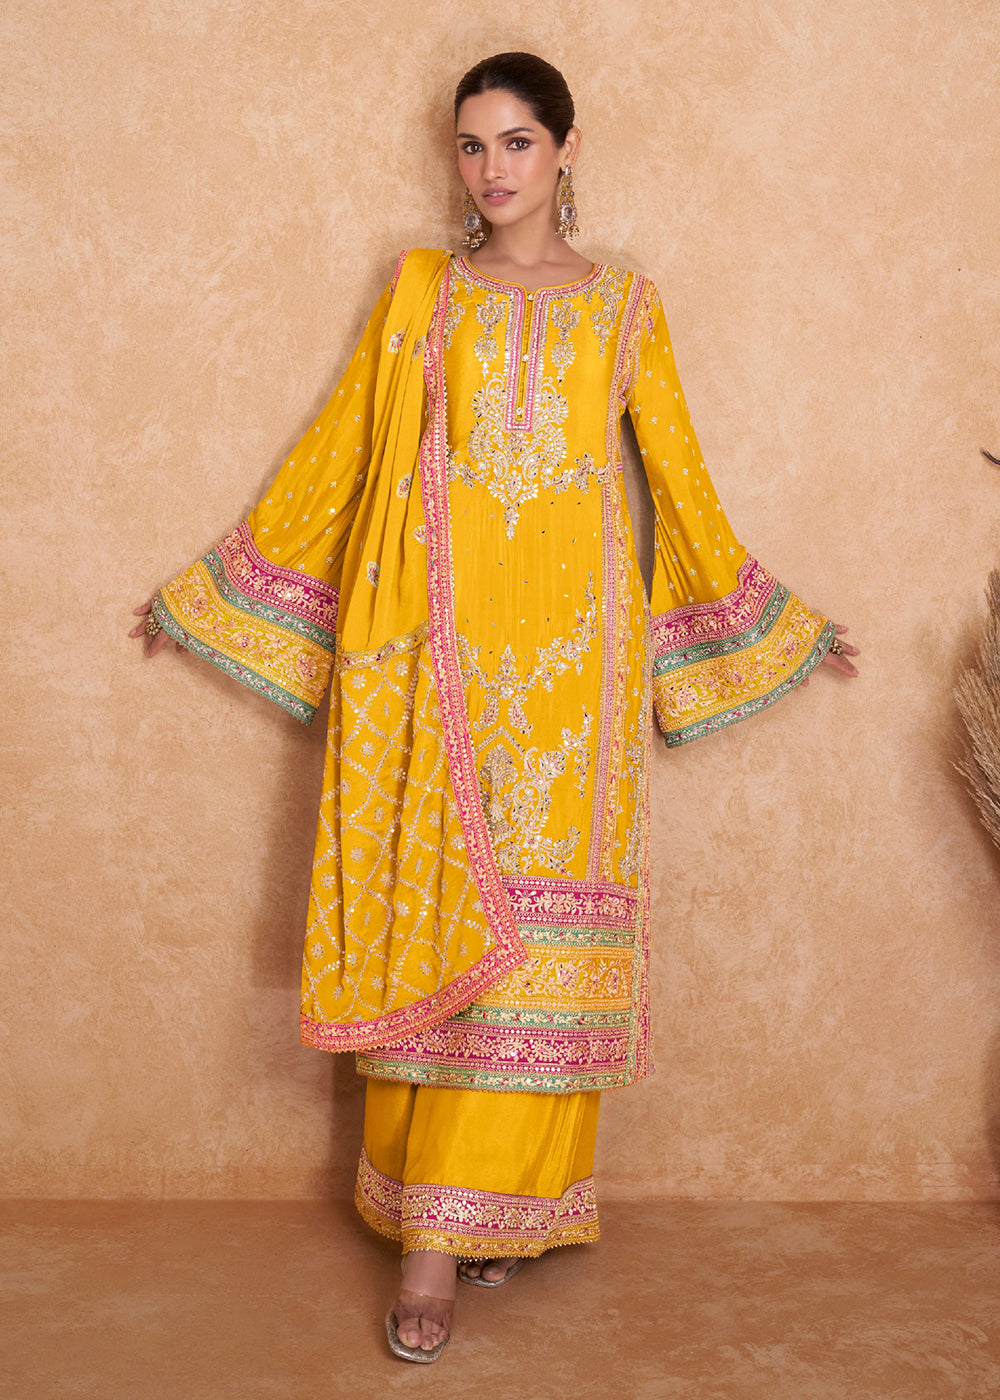 Buy Now Fancy Bright Yellow Chinnon Embroidered Designer Palazzo Suit Online in USA, UK, Canada, Germany, Australia & Worldwide at Empress Clothing.